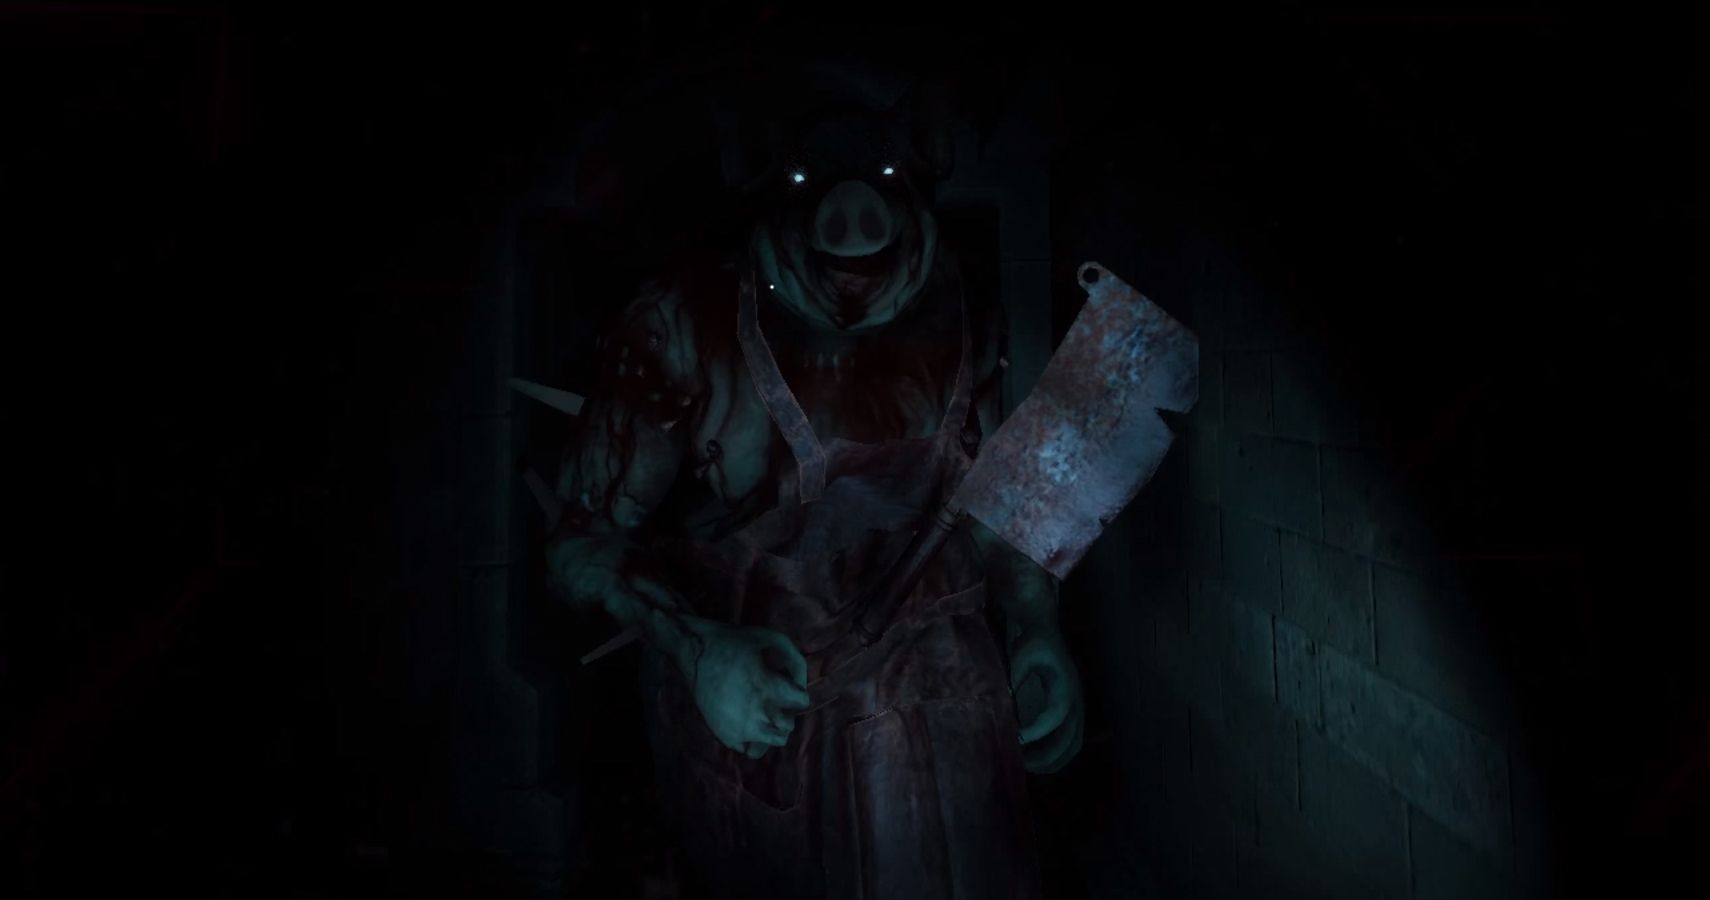 Multiplayer Horror Game Last Year is Now FREE on Steam